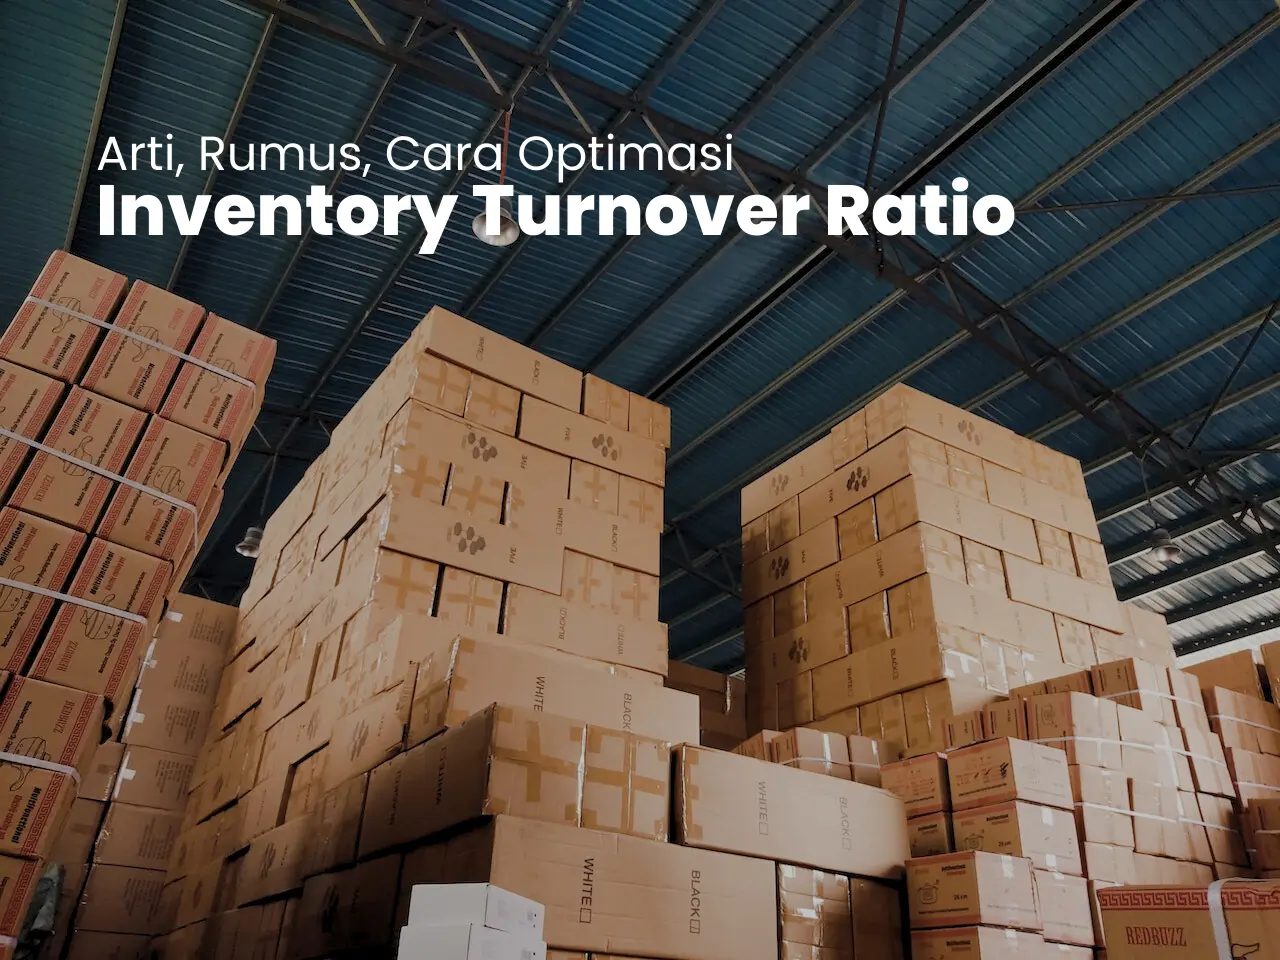 Inventory Turnover Ratio